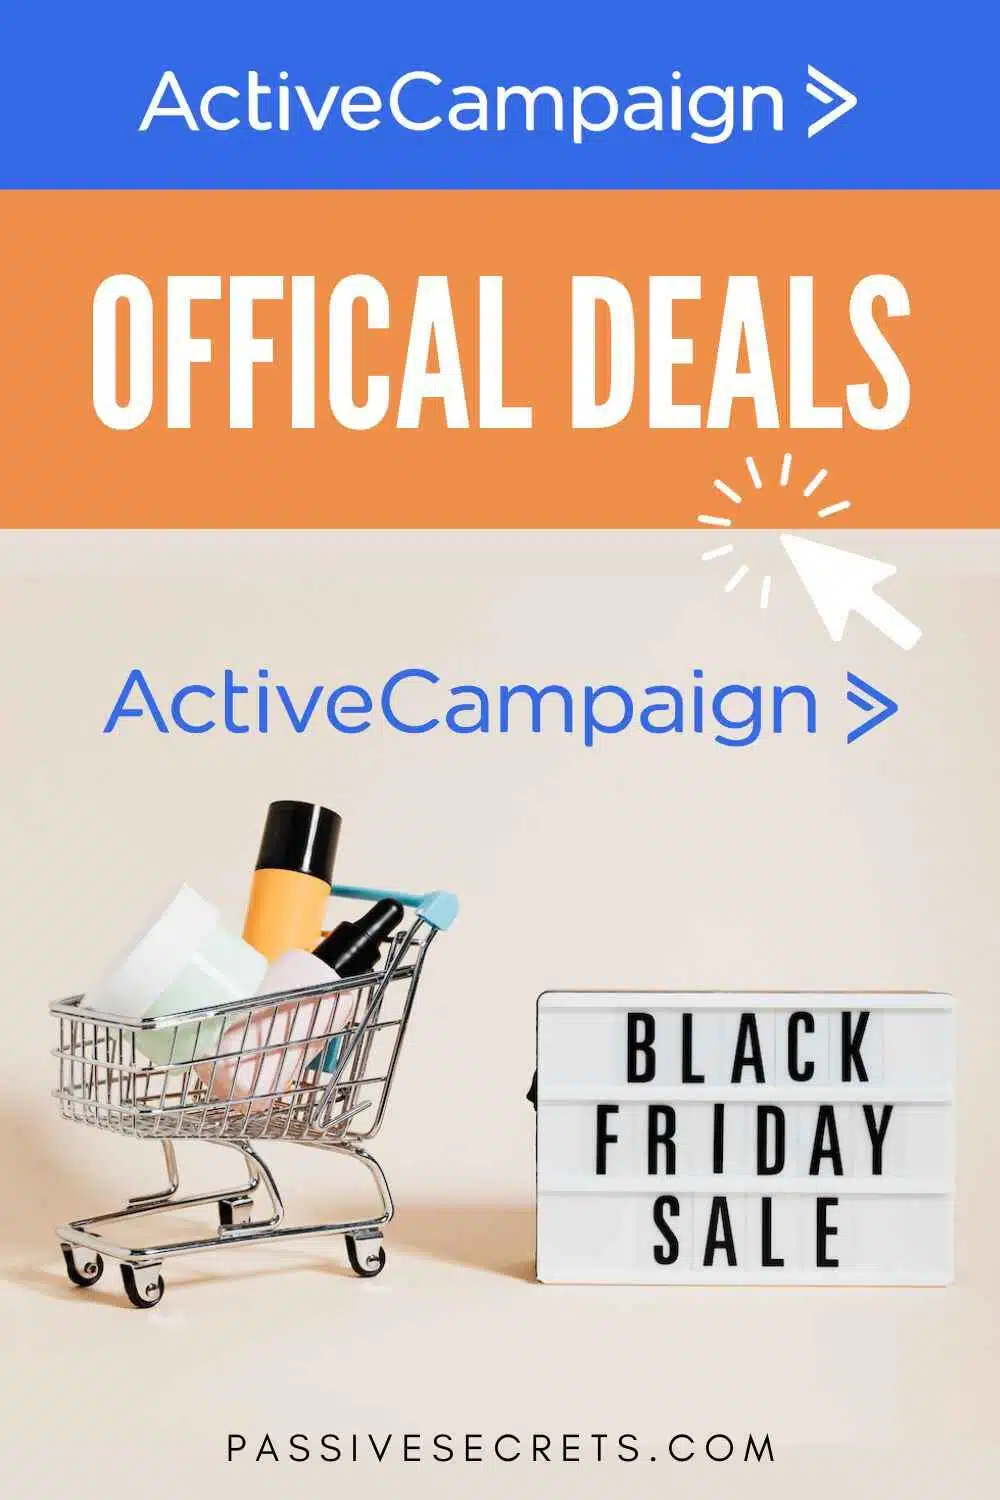 activecampaign black friday and cyber monday sales deals PassiveSecrets